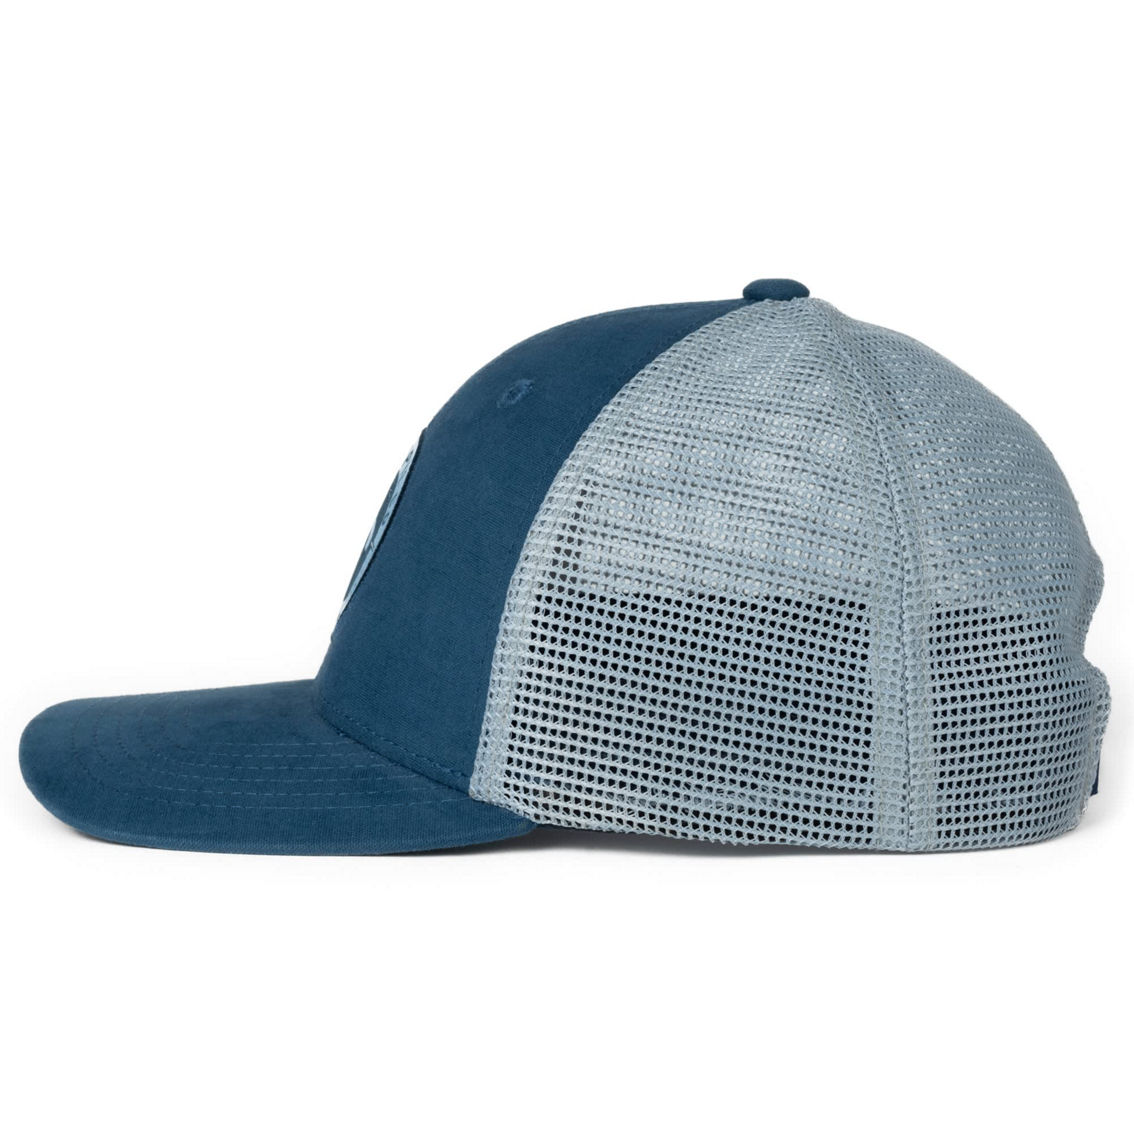 FH Drifter Hat - Image 2 of 3